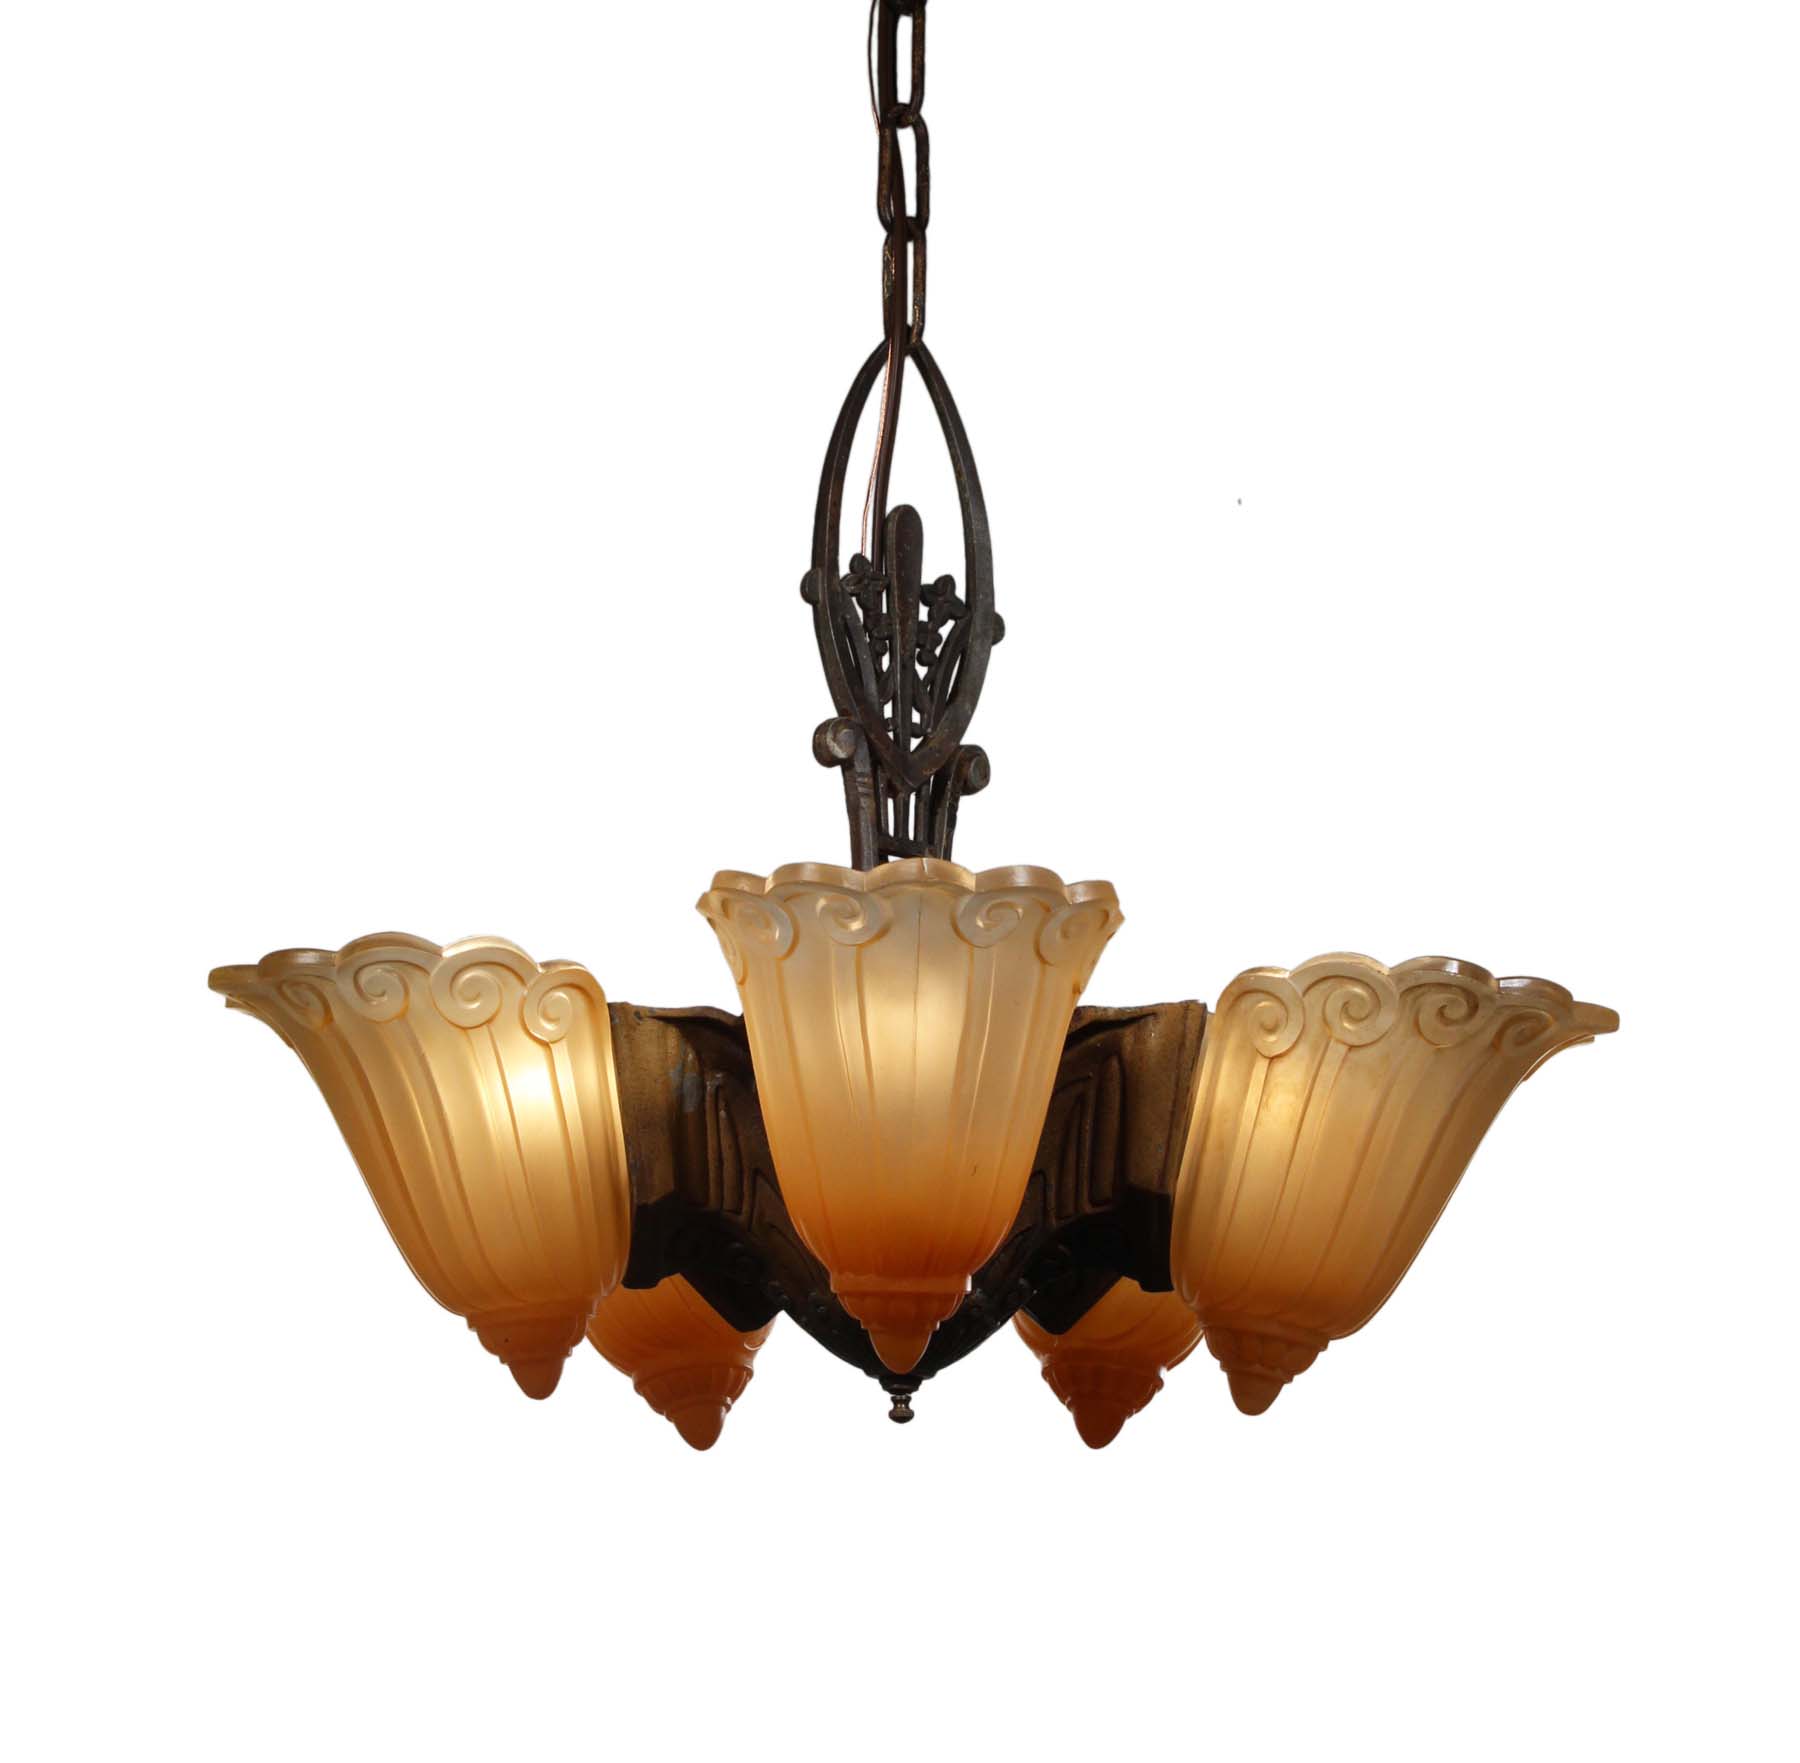 SOLD Art Deco Slip Shade Chandelier by Lincoln, Antique Lighting-0